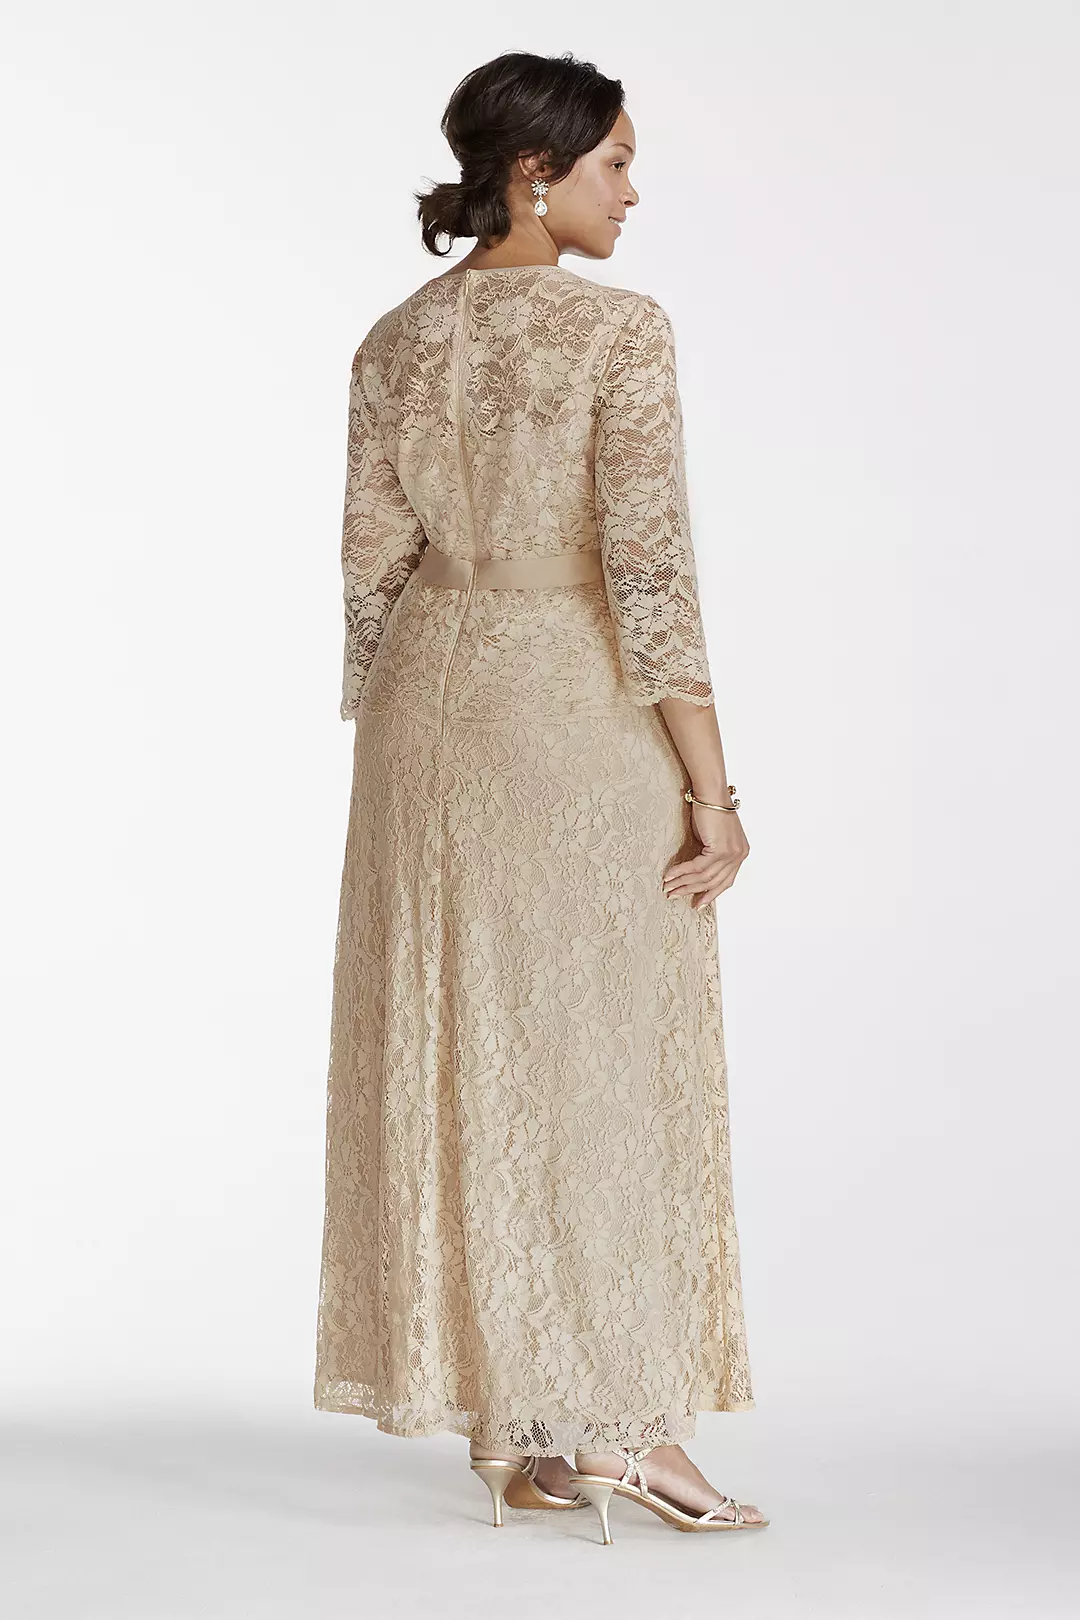 Long Lace Mock Two Piece Dress with Sash Image 2